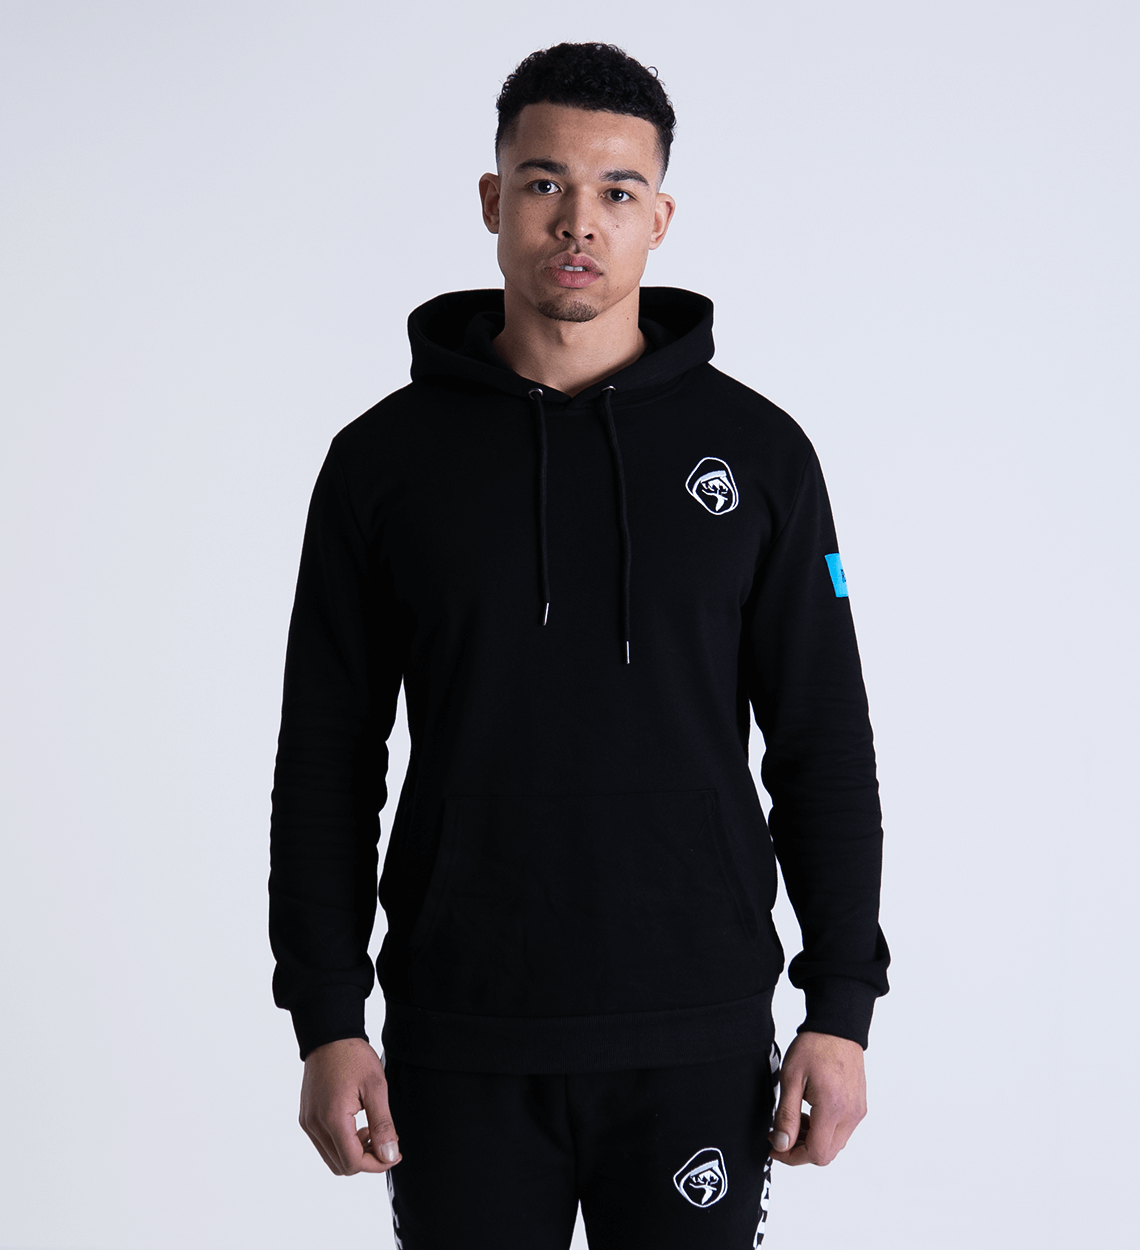 Download Rogue Hoodie - Raven.GG | Esports Apparel Design & Production